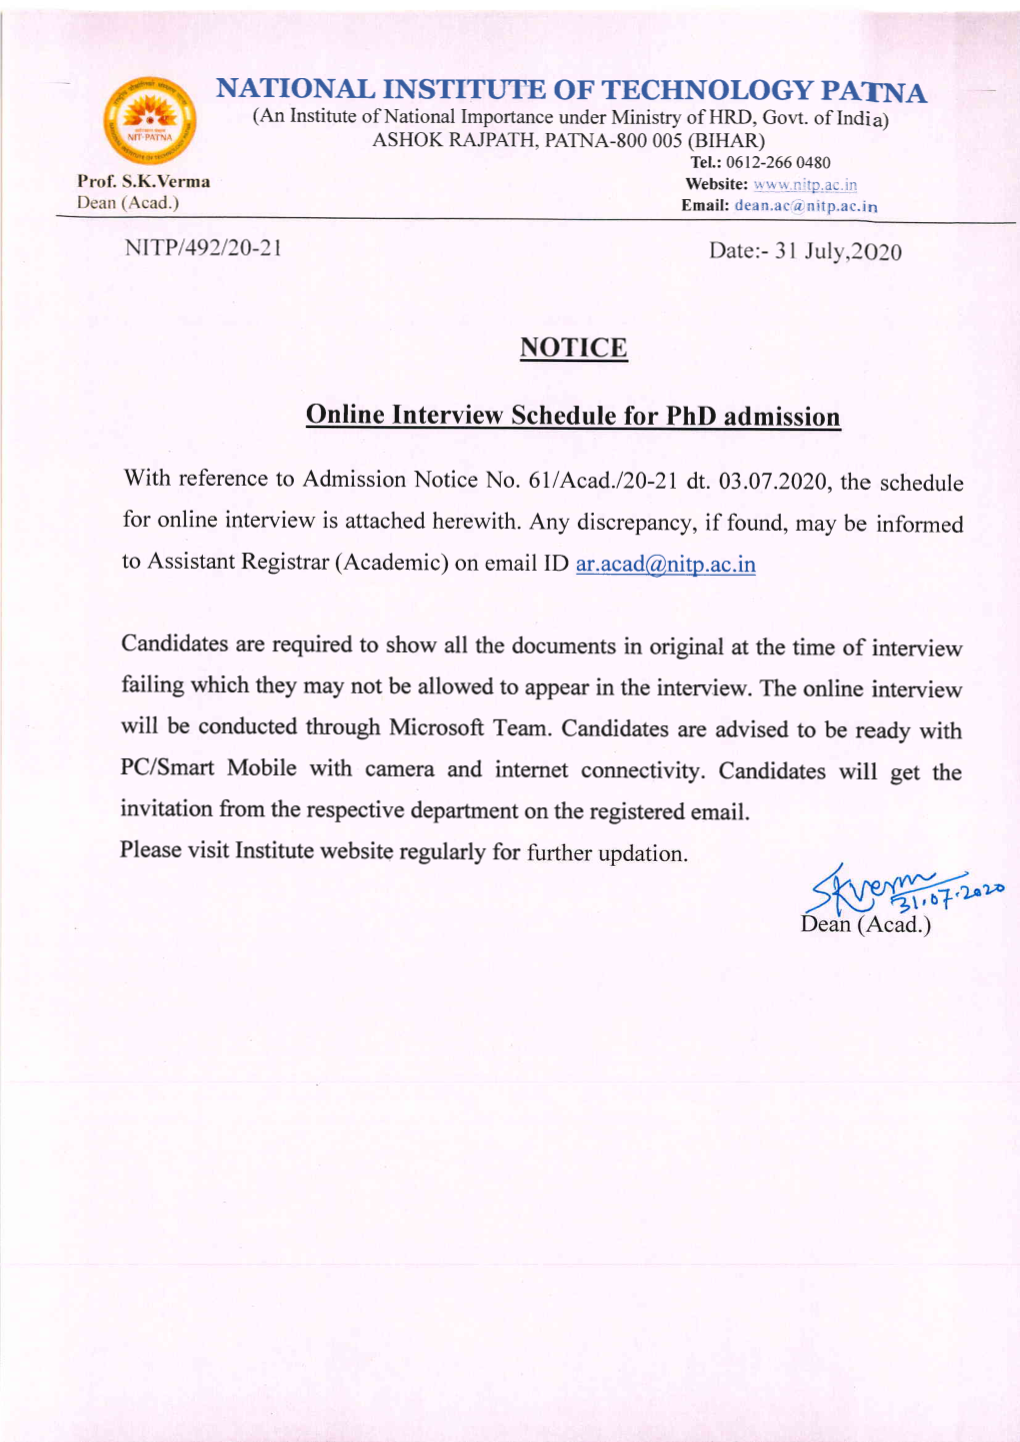 Online Interview Schedule for Phd Admission